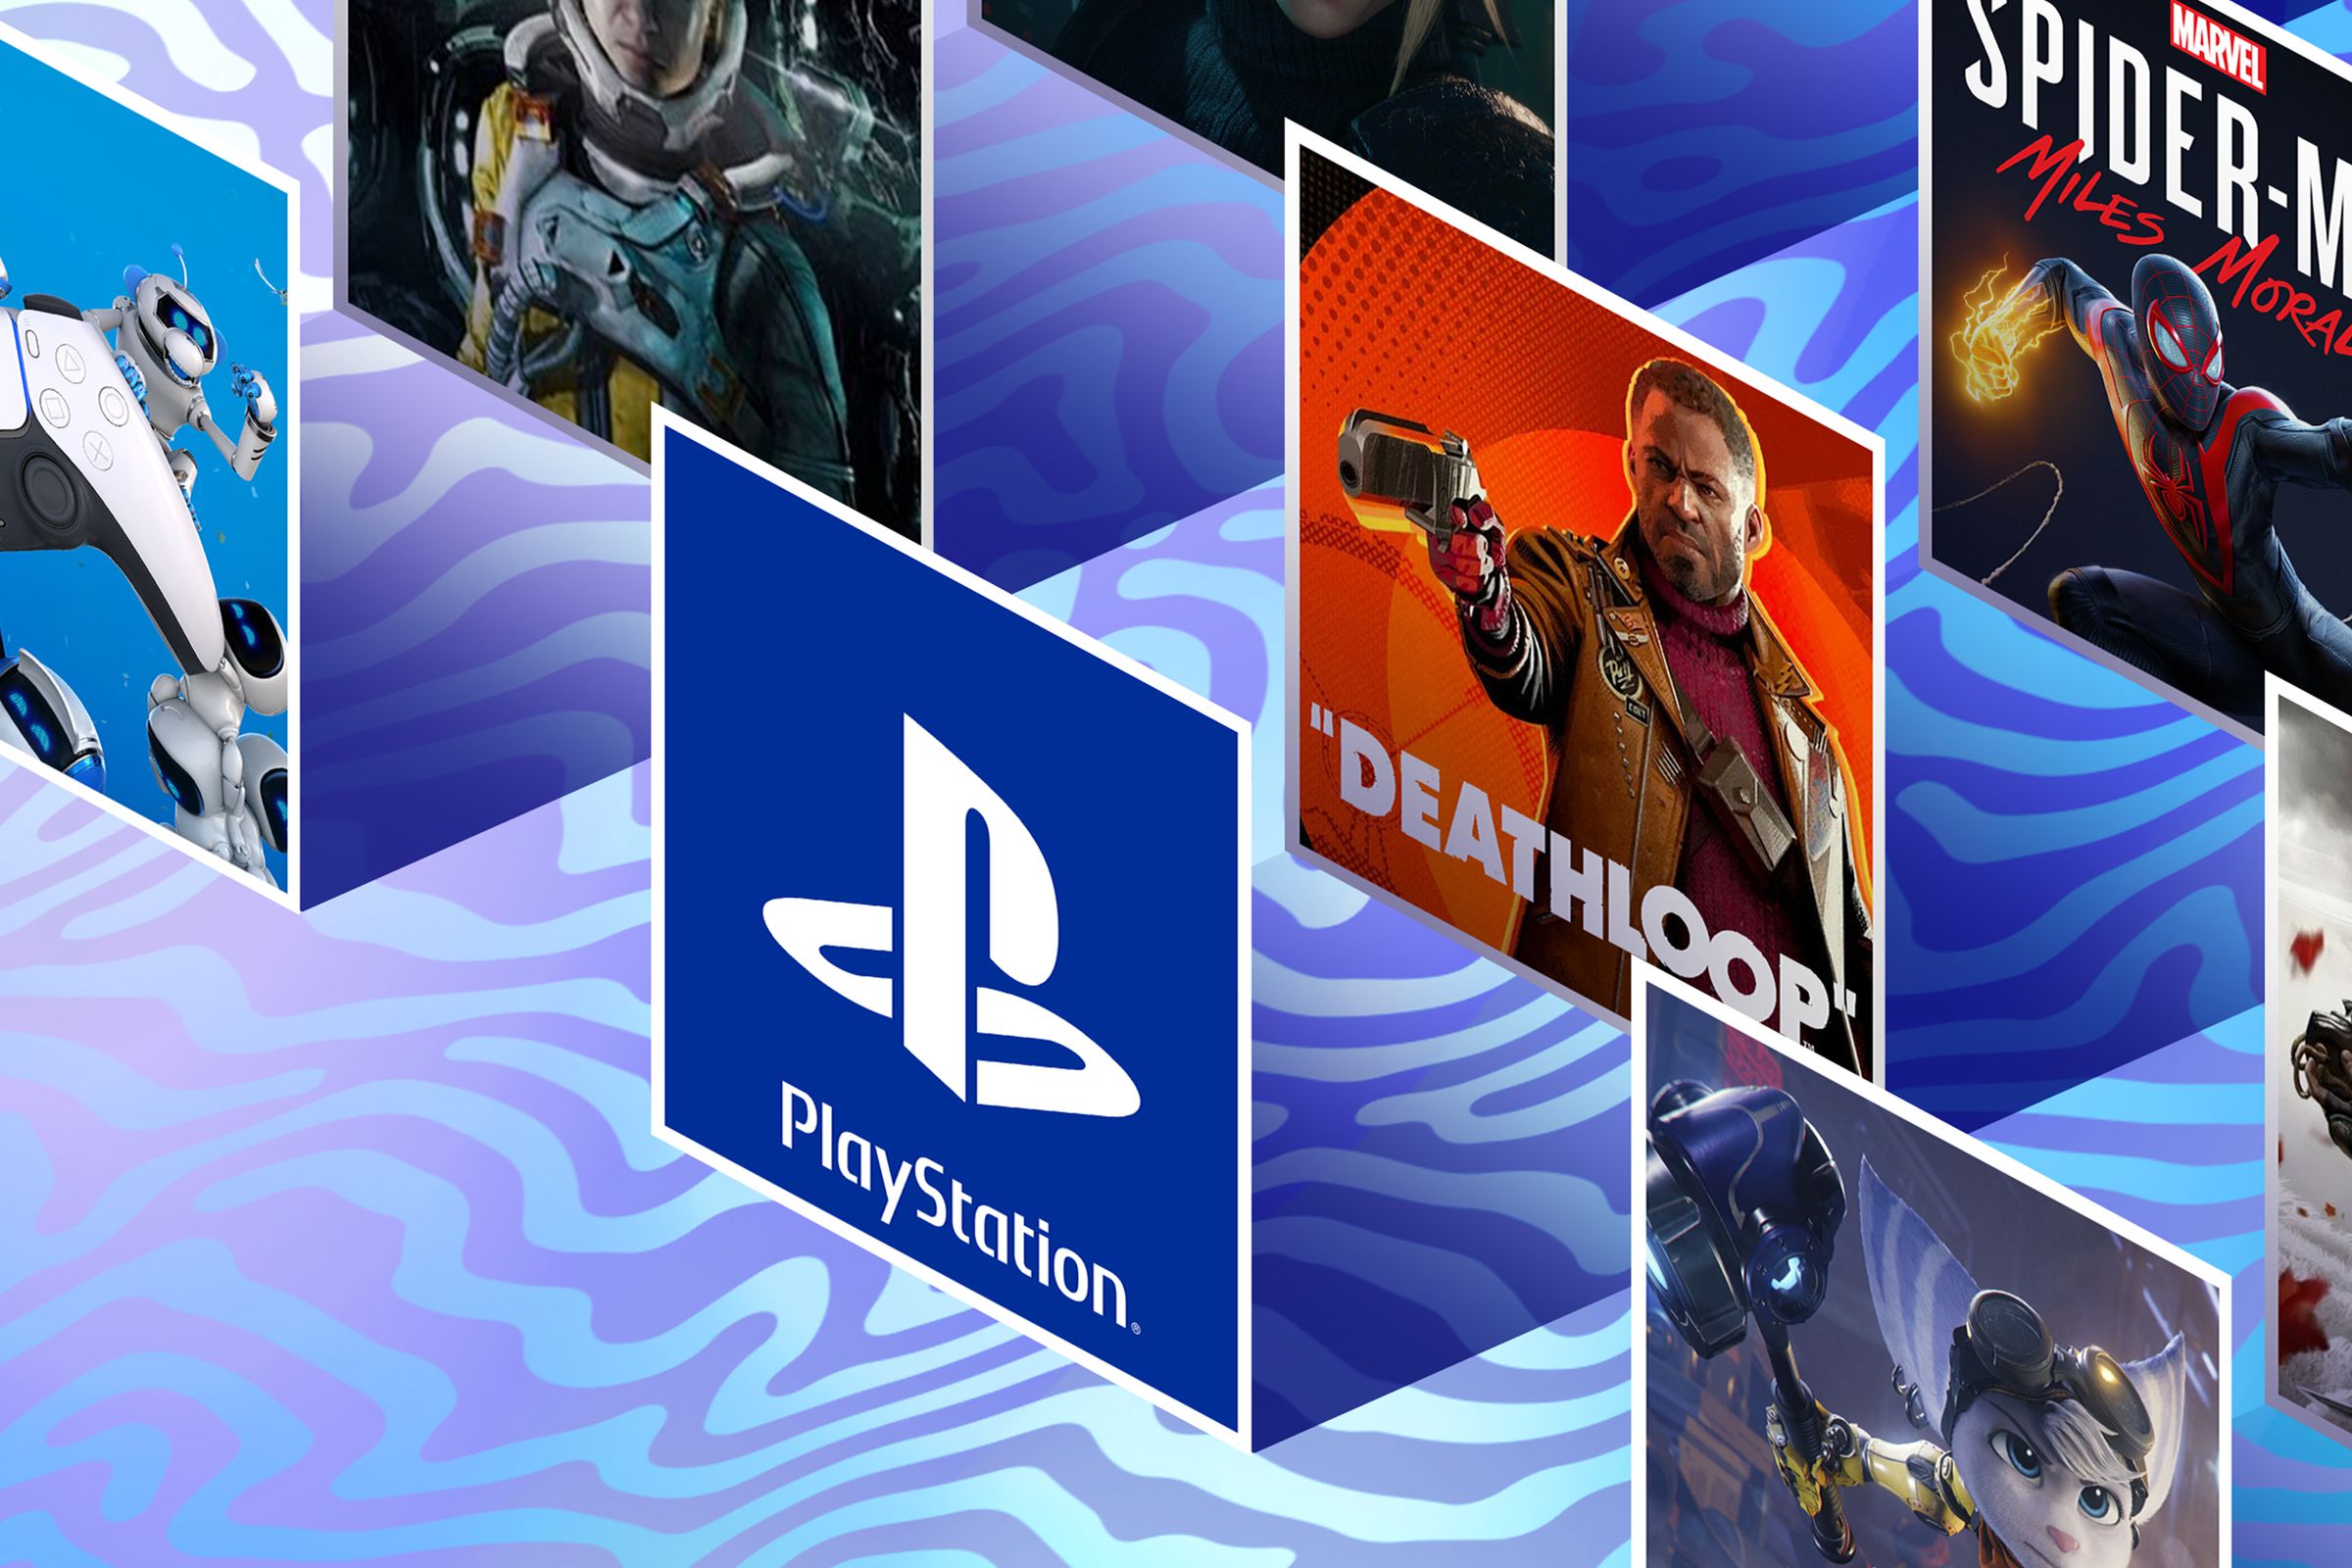 PlayStation game sales may pick up later this year.